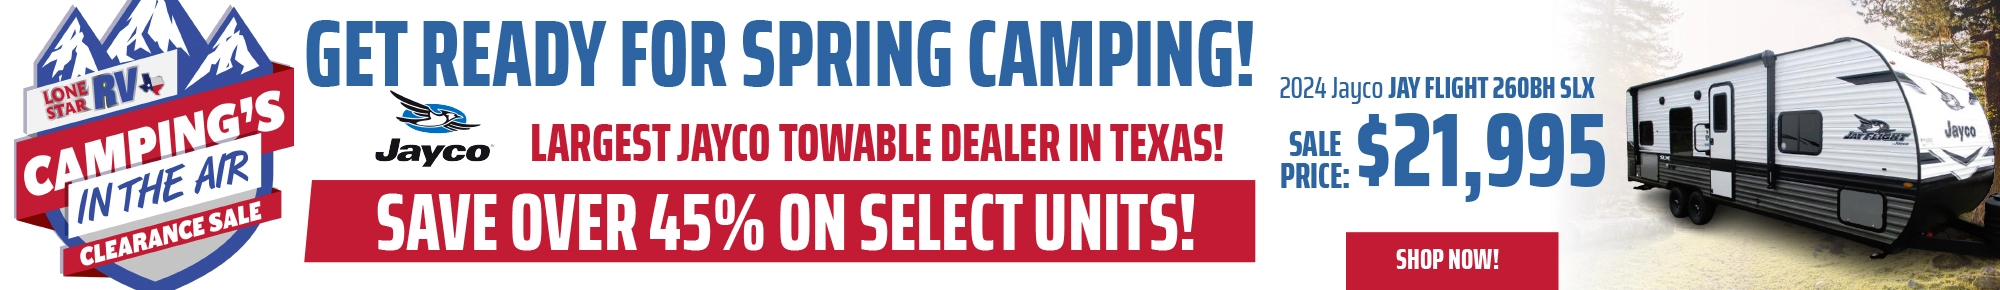 Lone Star RV's Camping's In The Air Clearance Sale